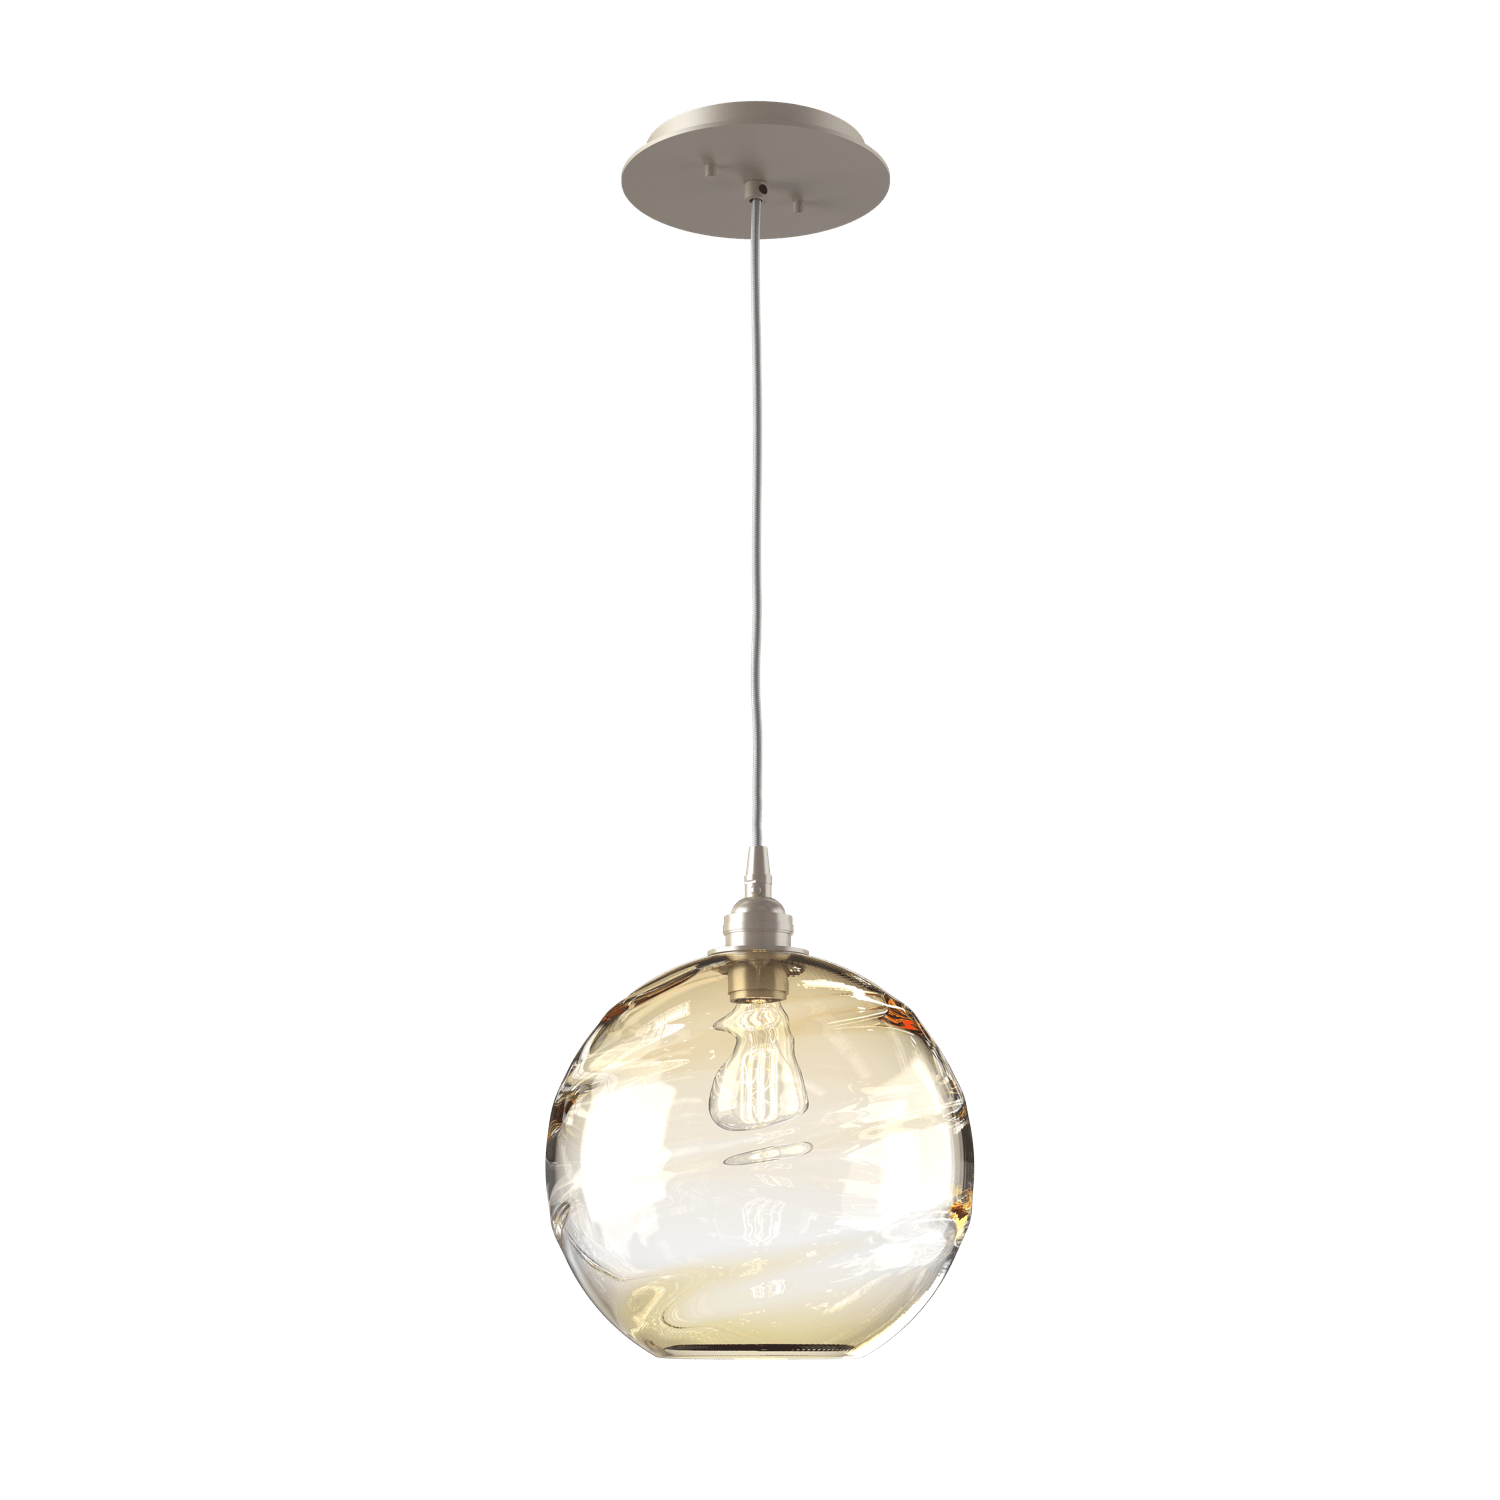 LAB0047-01-BS-OA-Hammerton-Studio-Optic-Blown-Glass-Terra-pendant-light-with-metallic-beige-silver-finish-and-optic-amber-blown-glass-shades-and-incandescent-lamping